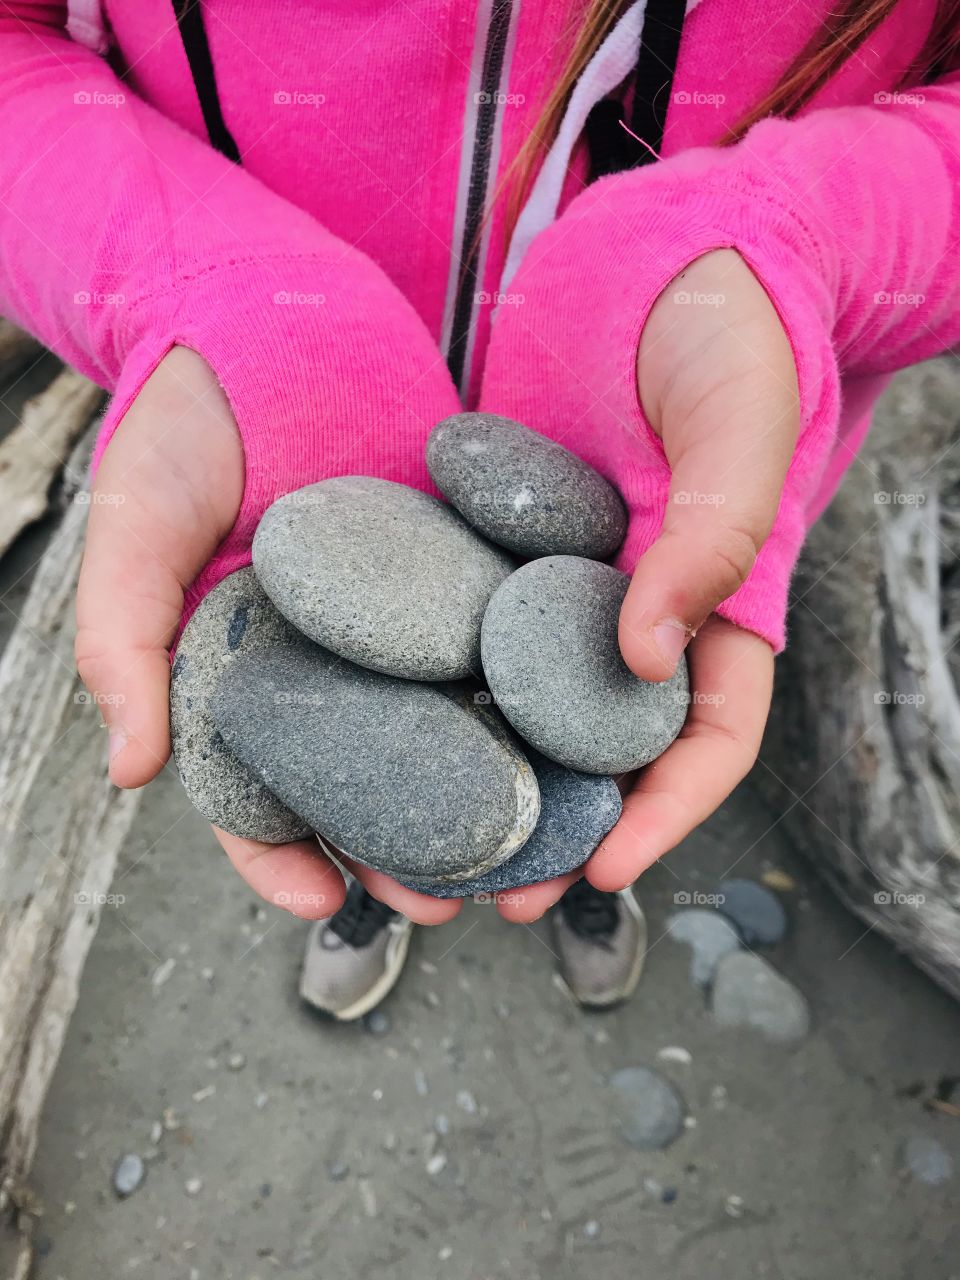 Smooth gray rocks in hands of girl wearing beautiful bright pink sweatshirt and perfect tennis for beach combing! 